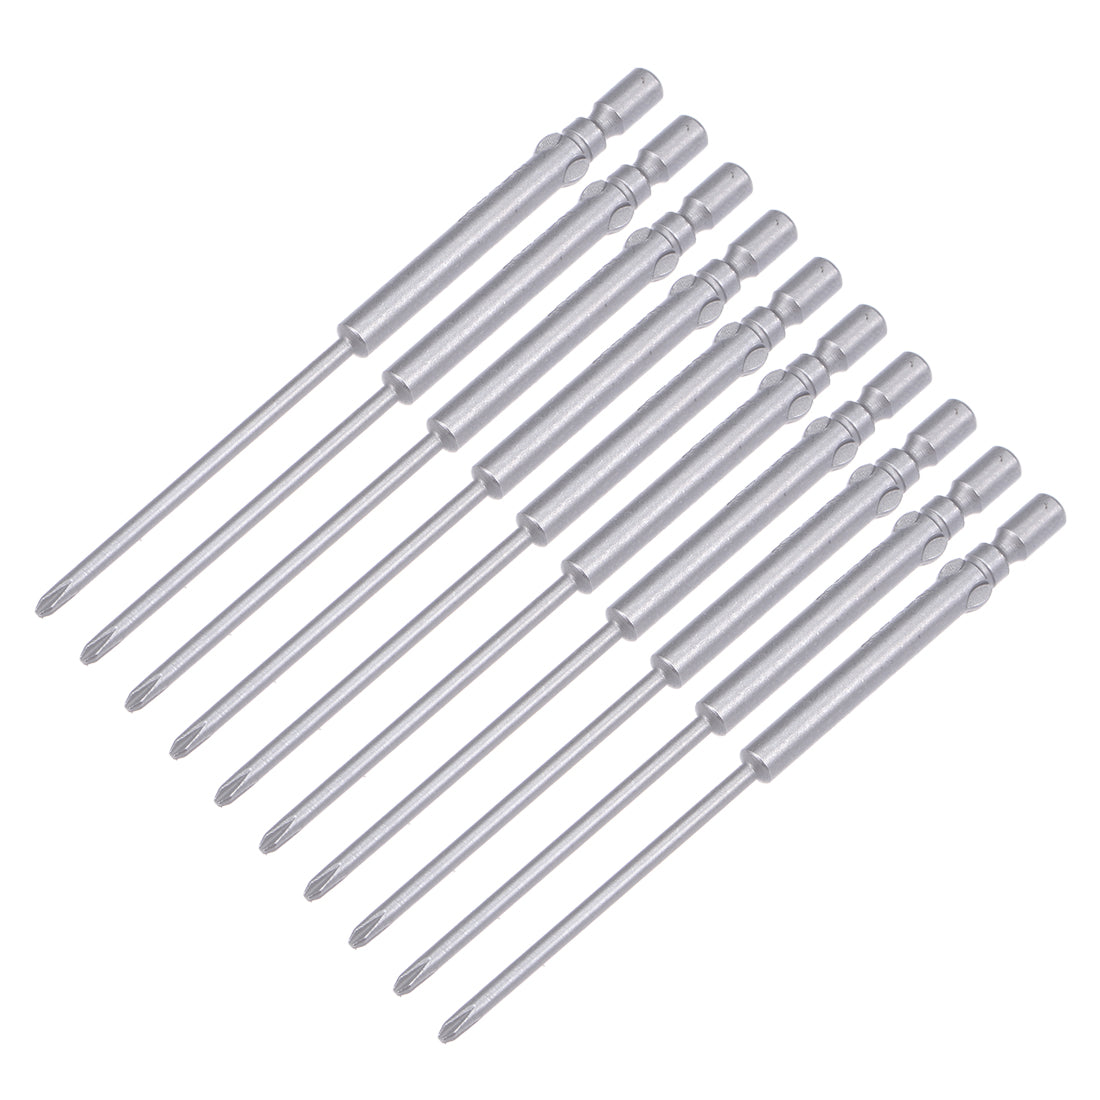 Uxcell Uxcell 10 Pcs 4mm Shank 80mm Length 2mm Phillips PH0 Magnetic S2 Screwdriver Bits